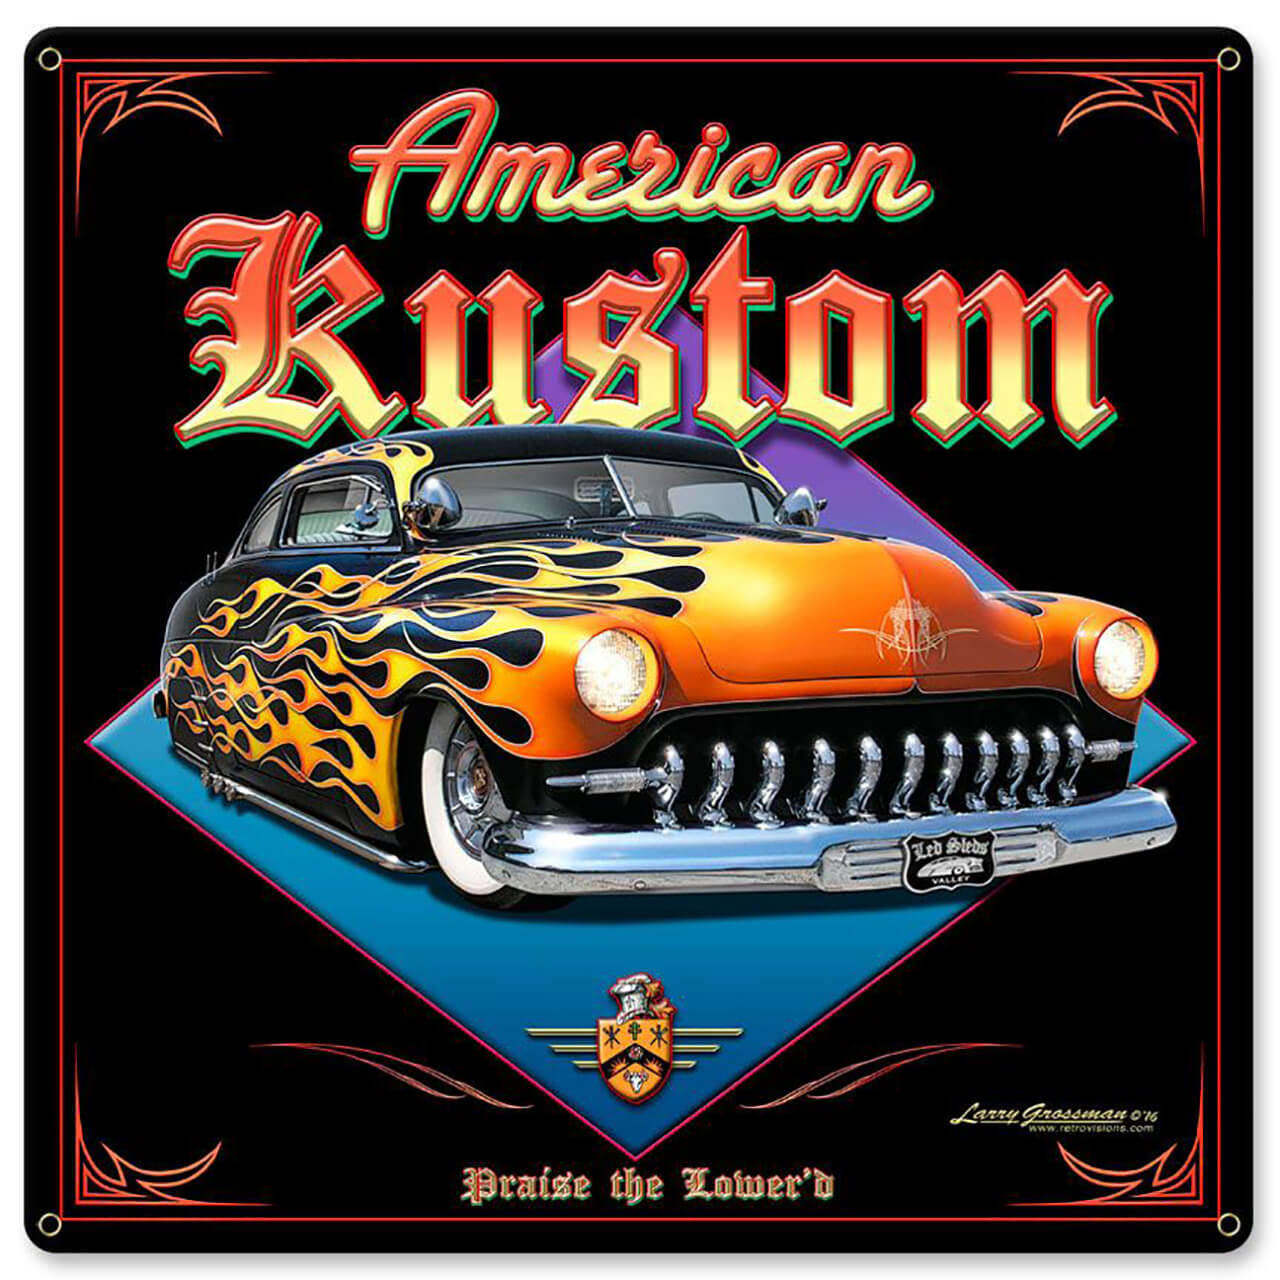 American Kustom Square Metal Sign 12 x 12 Inches